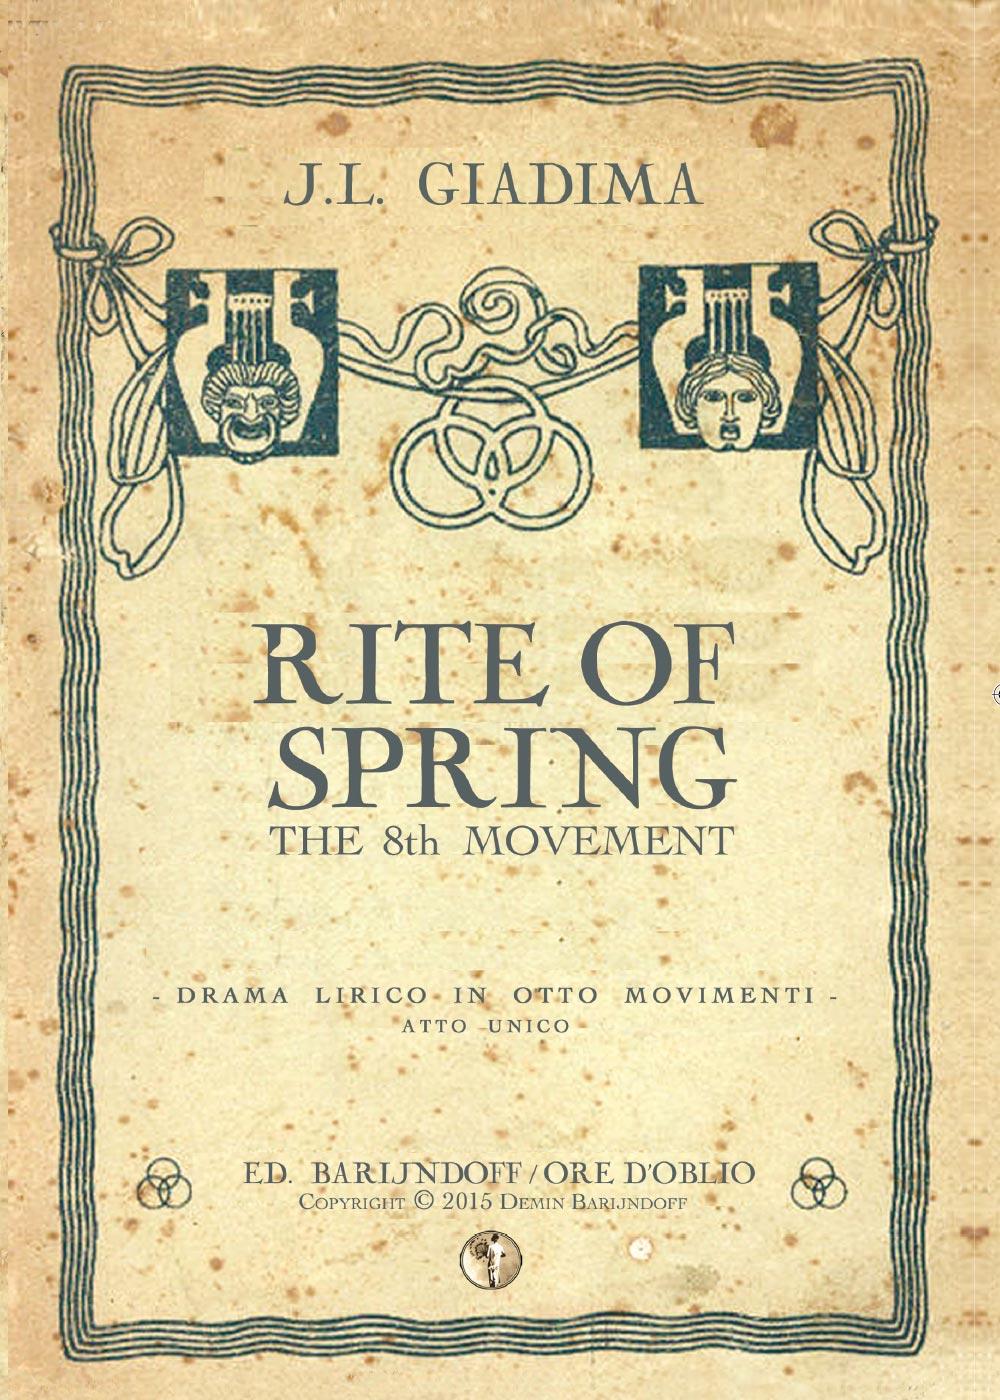 Rite of Spring, the 8th Movement